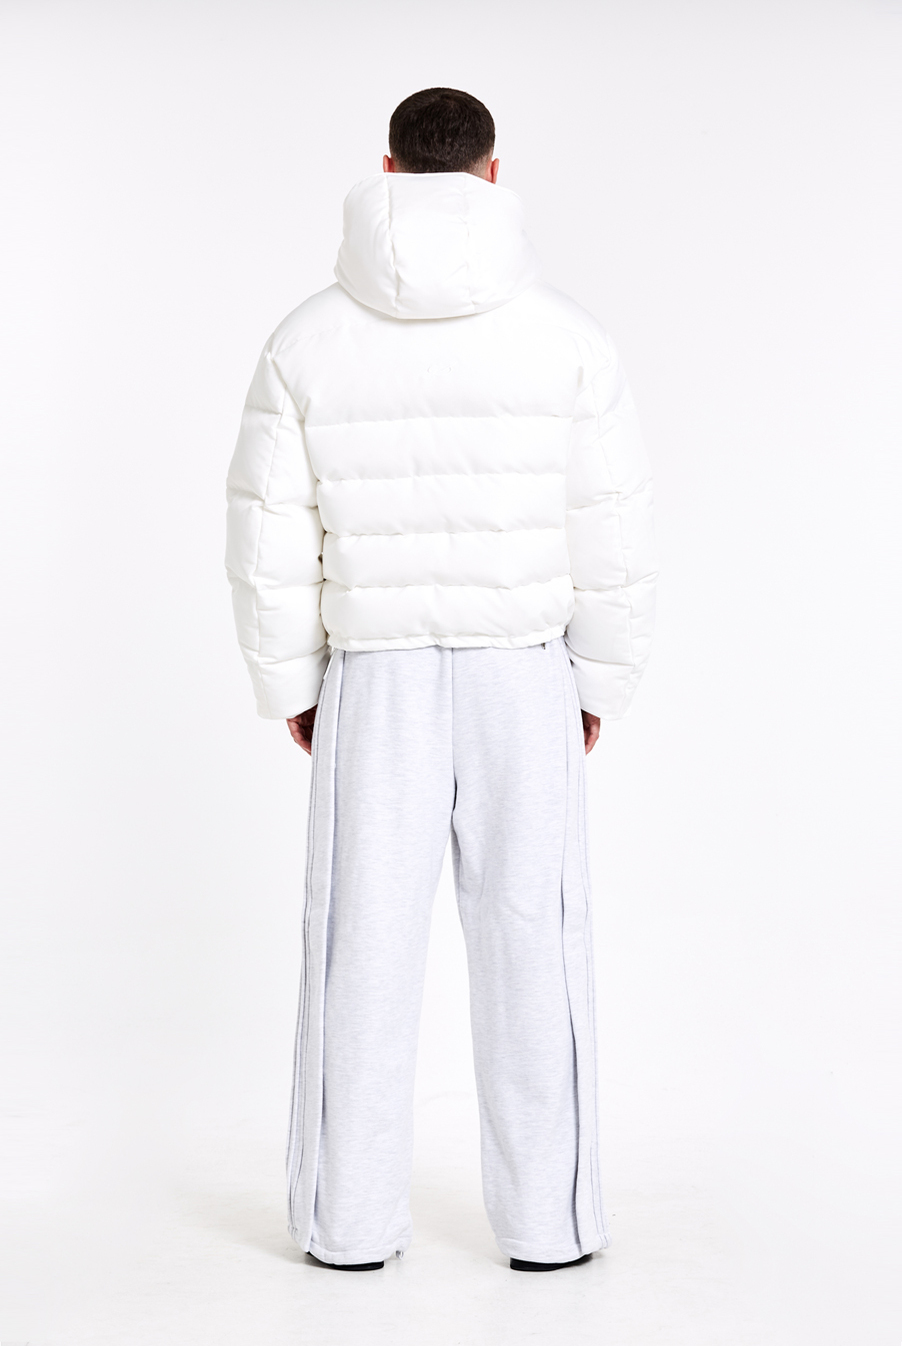 Tunnel Lining hoodie down jacket - White